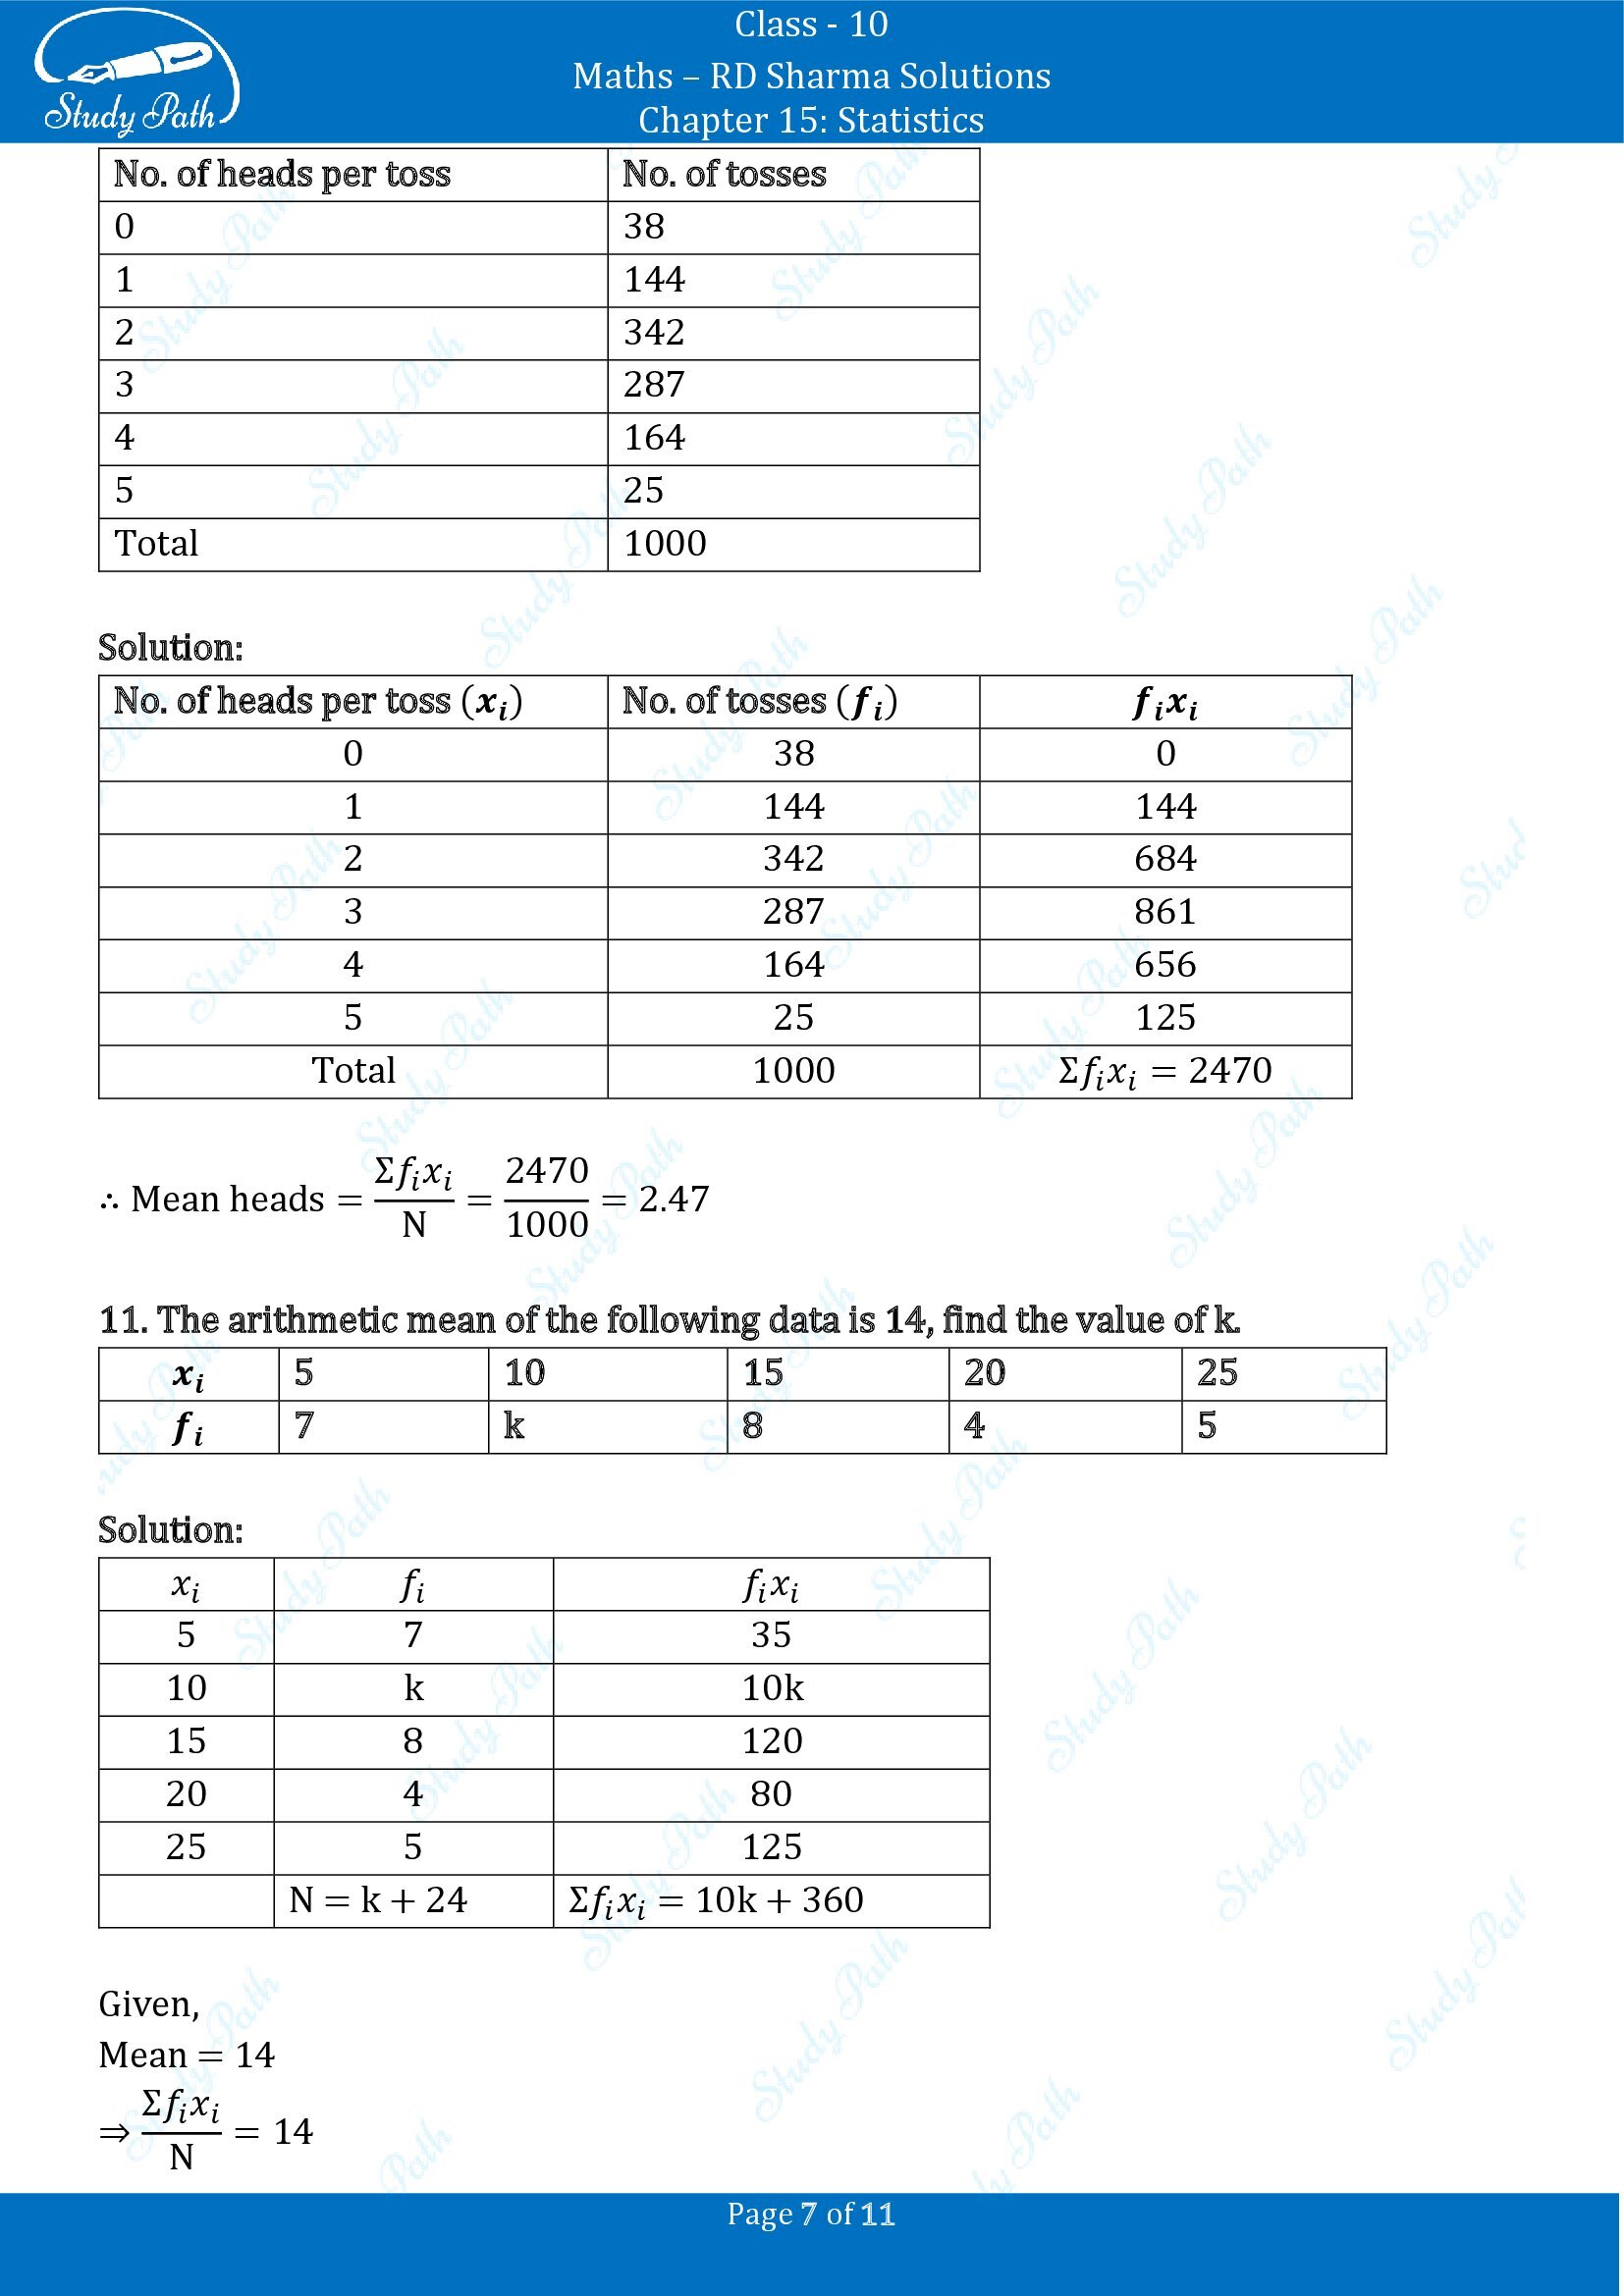 RD Sharma Solutions Class 10 Chapter 15 Statistics Exercise 15.1 00007